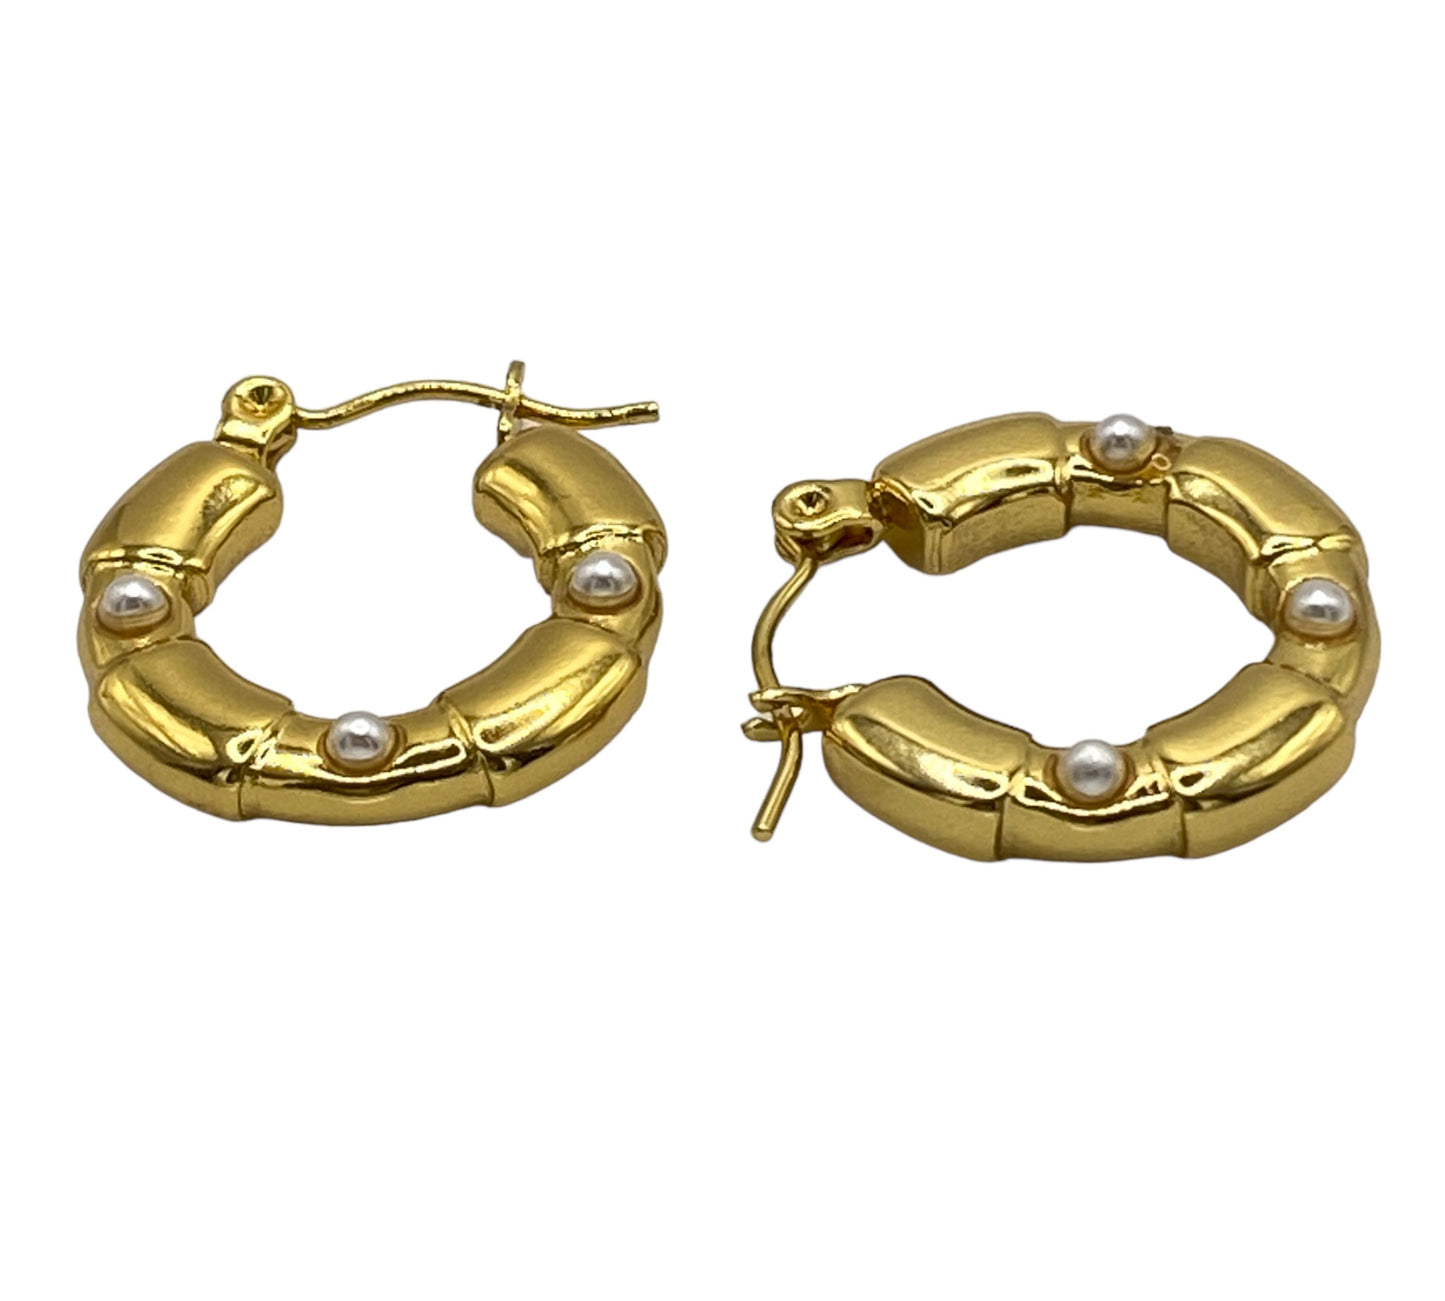 "SYMIRNA" gold plated hoop earrings with pearls